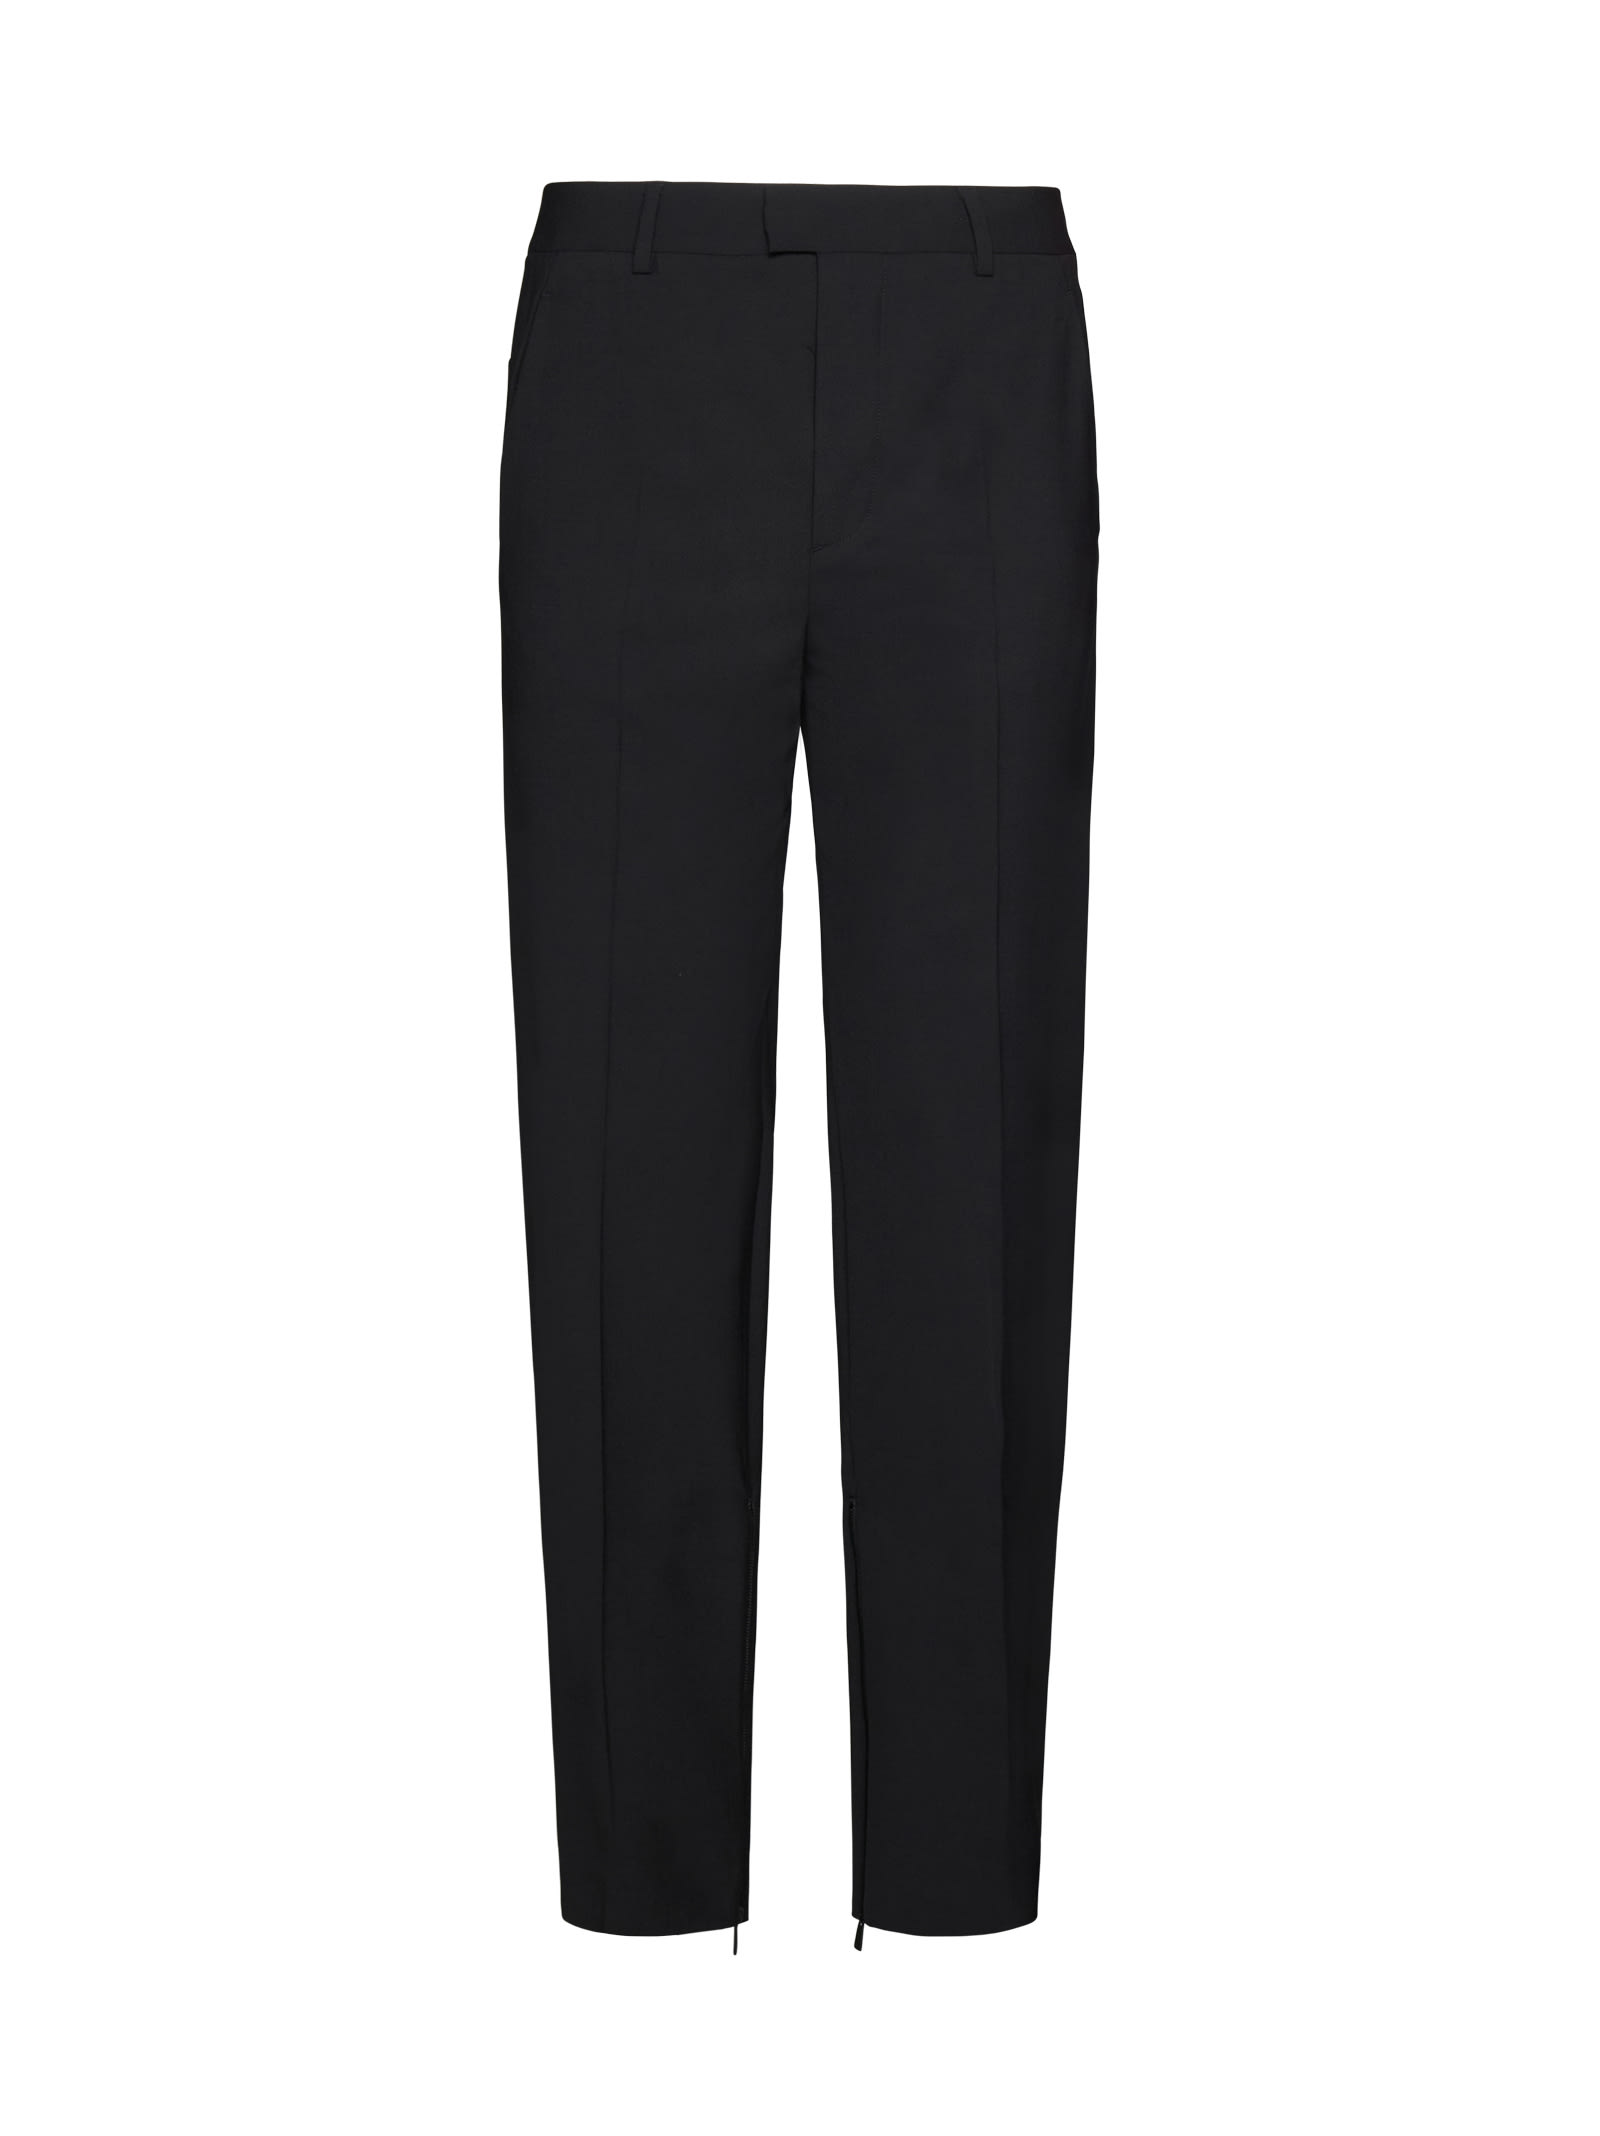 Embroidered Slim Zip Trousers